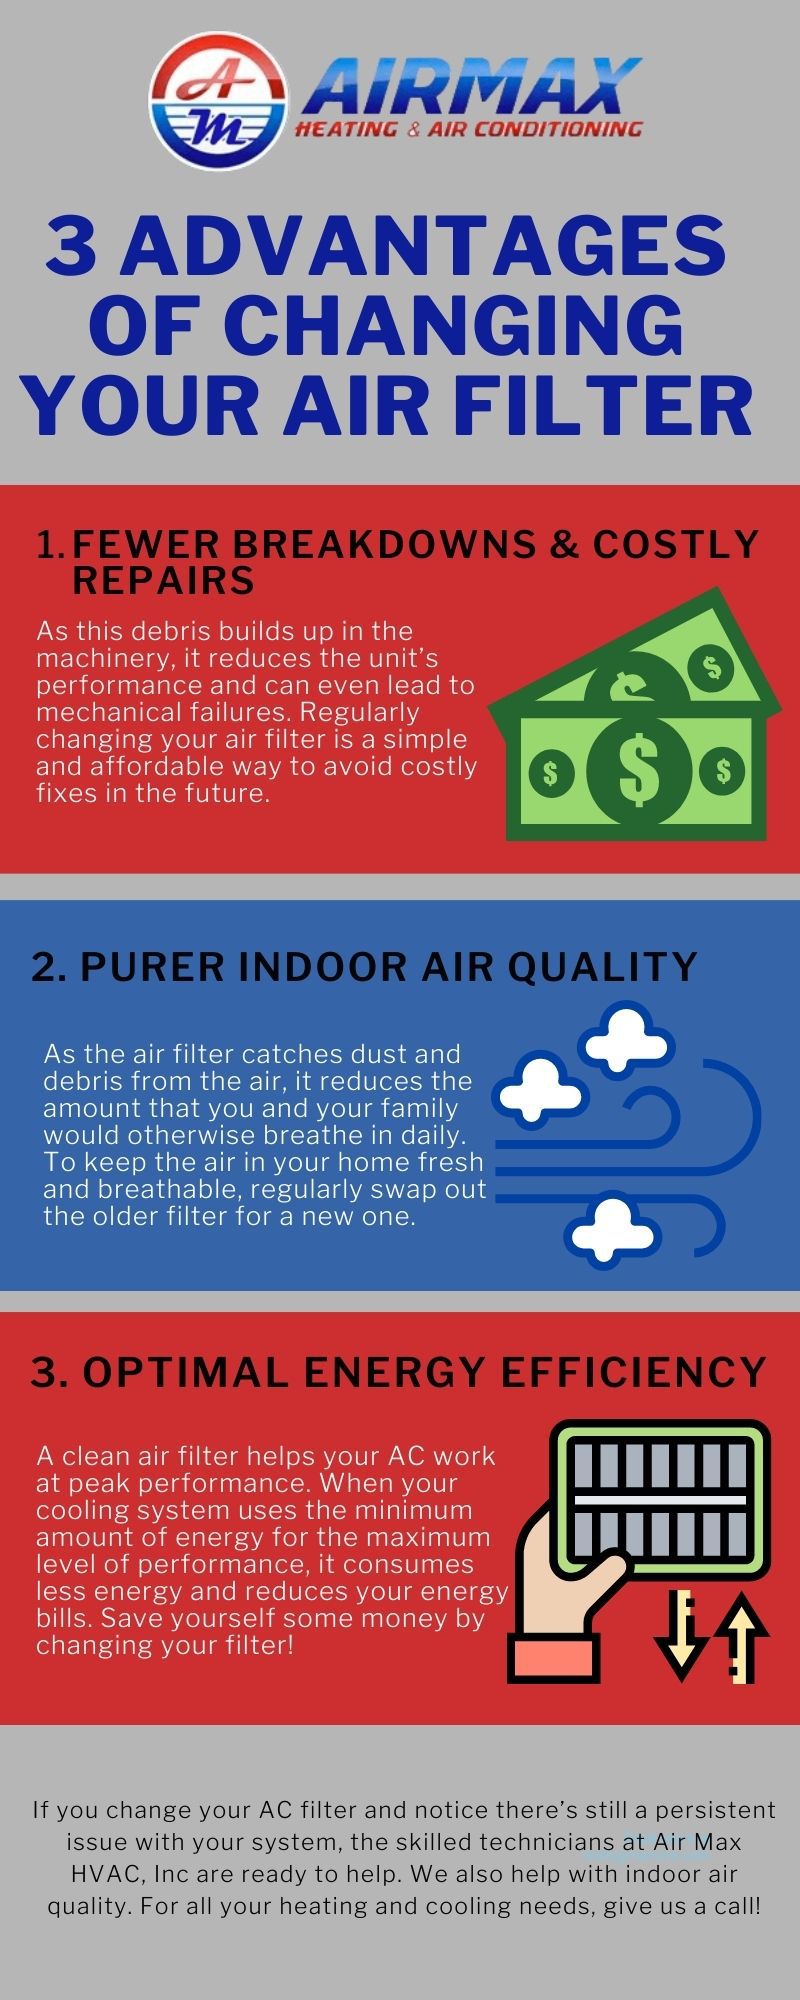 3 Advantages of Changing Your Air Filter